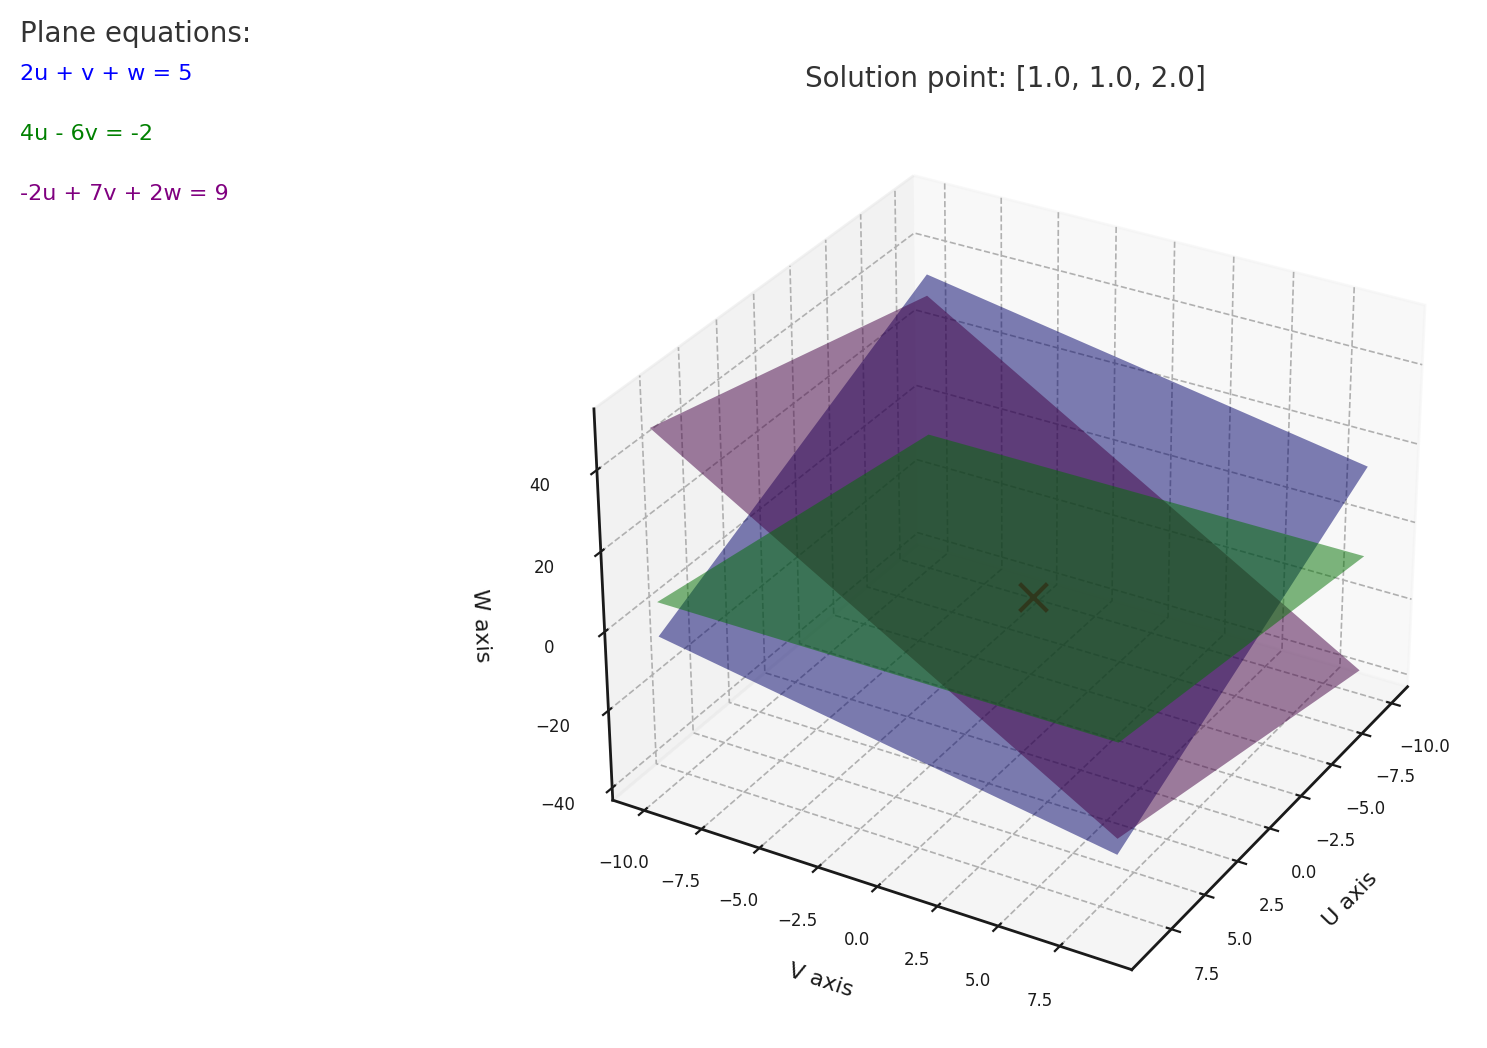 Solution to the system using planes. (Source: ChatGPT/matplotlib)